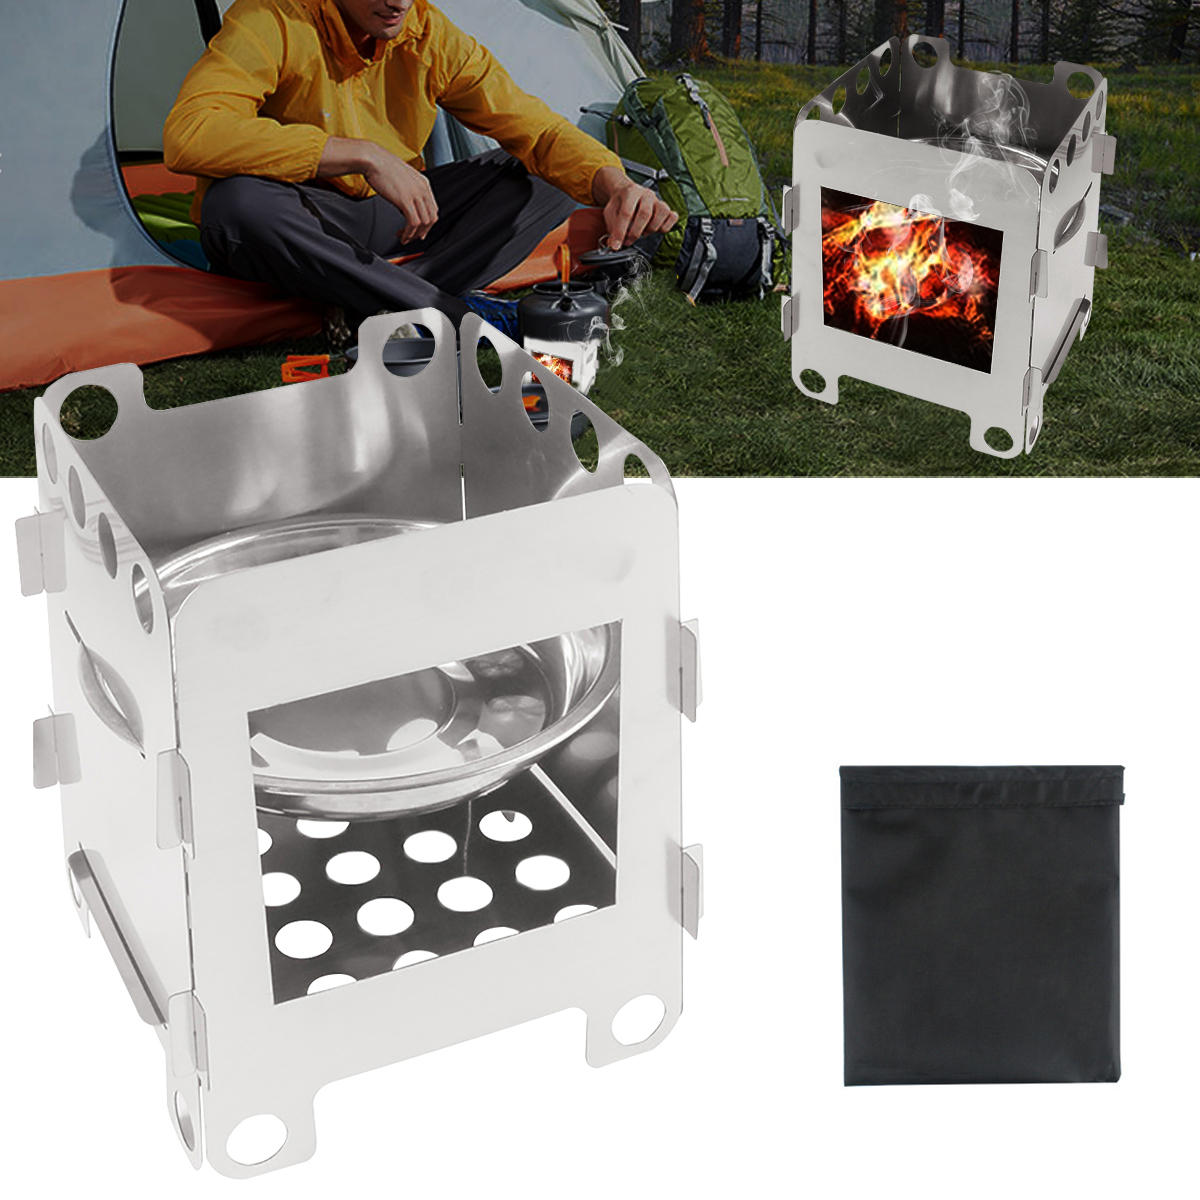 IPRee® Outdoor Portable Wood Cooking Stove Stainless Steel Picnic BBQ Burner Furnace Camping Hiking